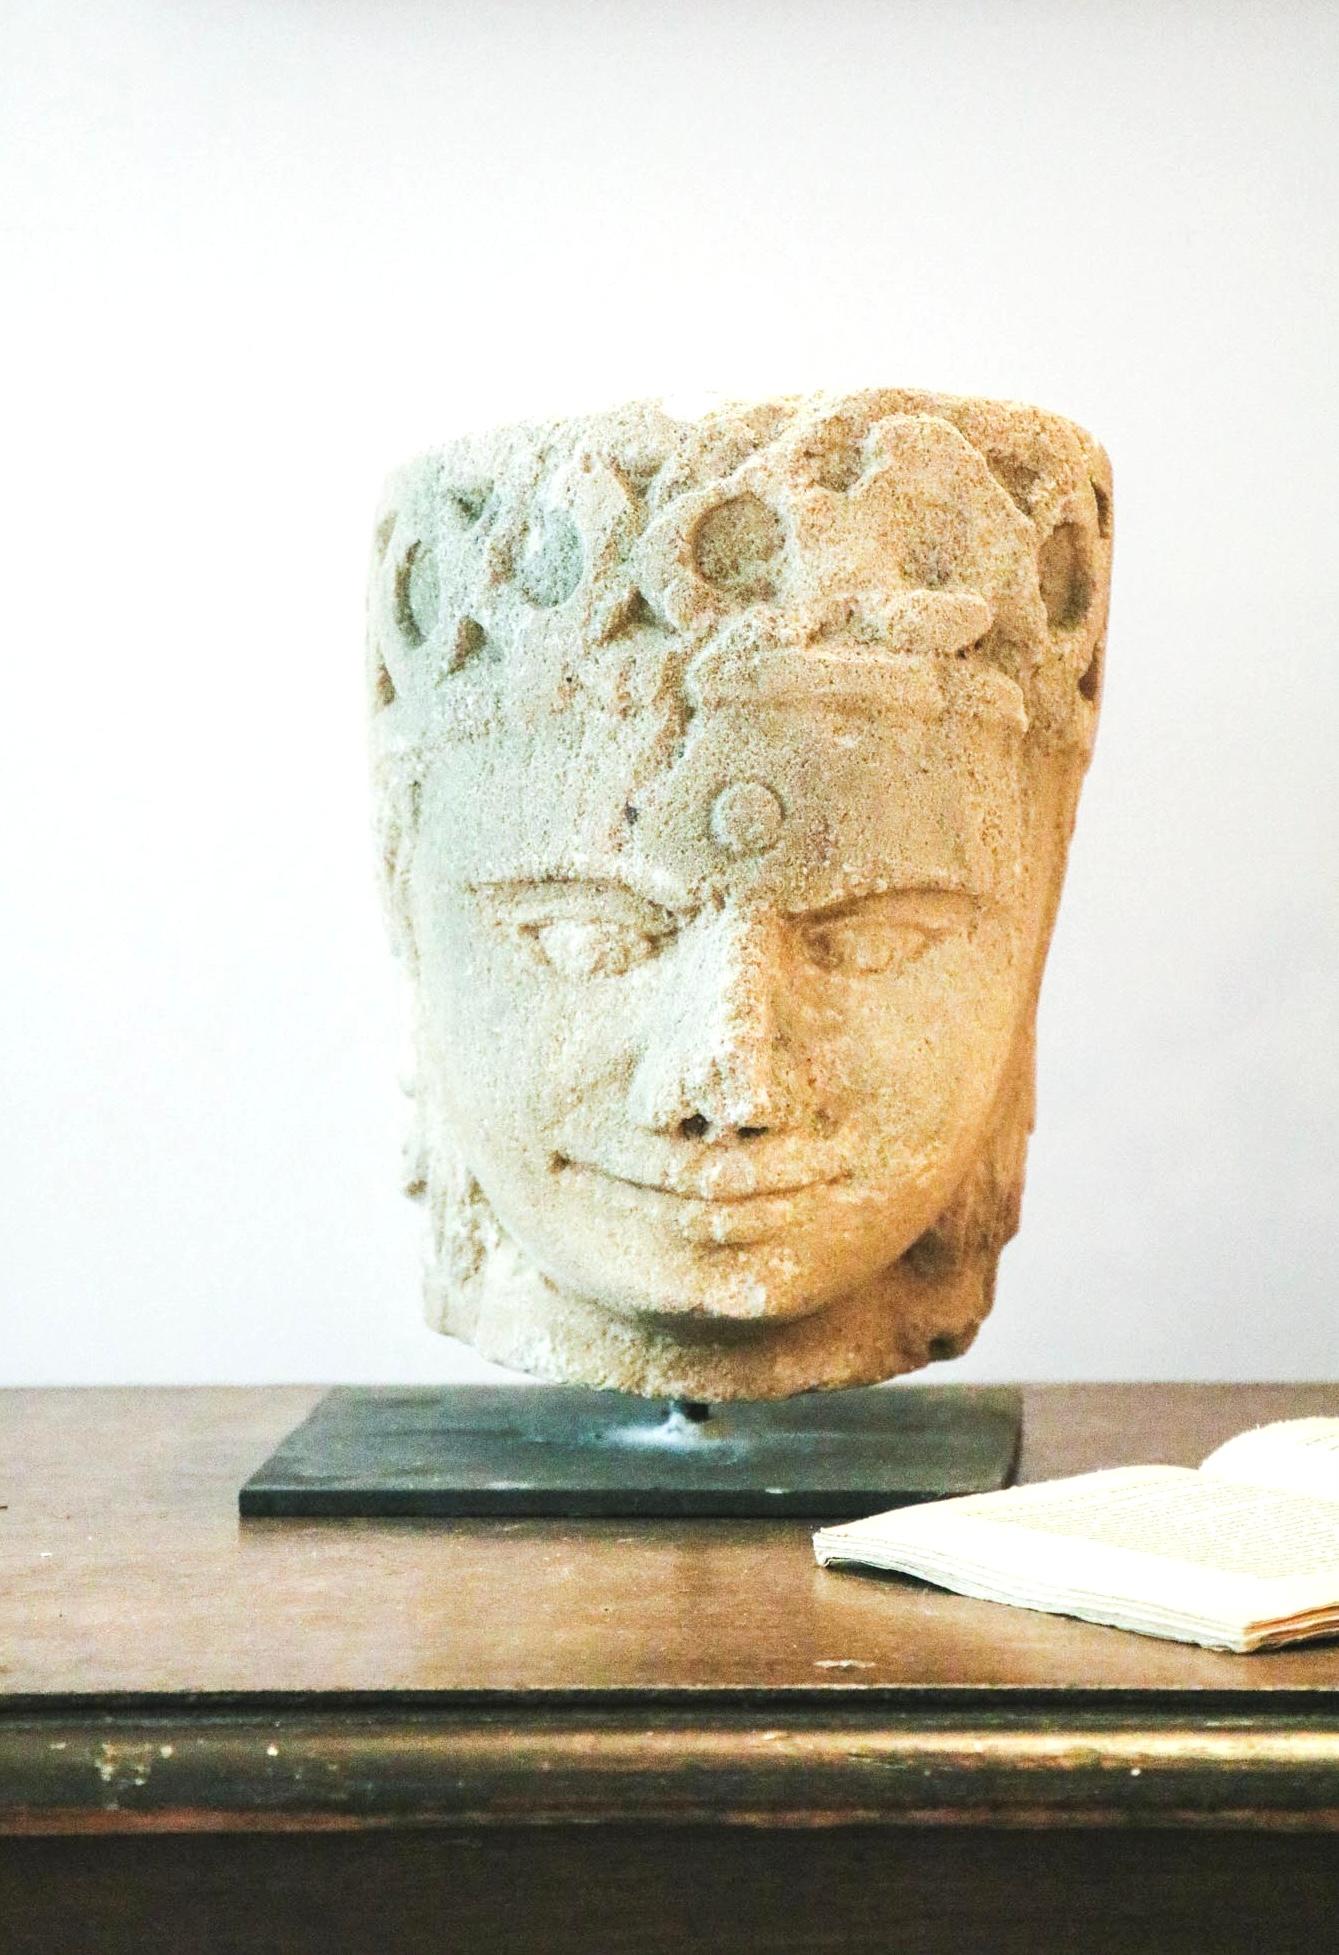 Beautiful stone sculpture featuring an Indian woman wearing earrings and a crown with rounds patterns carved. 
Mounted on a modern iron basement you could easily remove it.
Its simplicity and serenity of the face makes of it a beautiful piece of